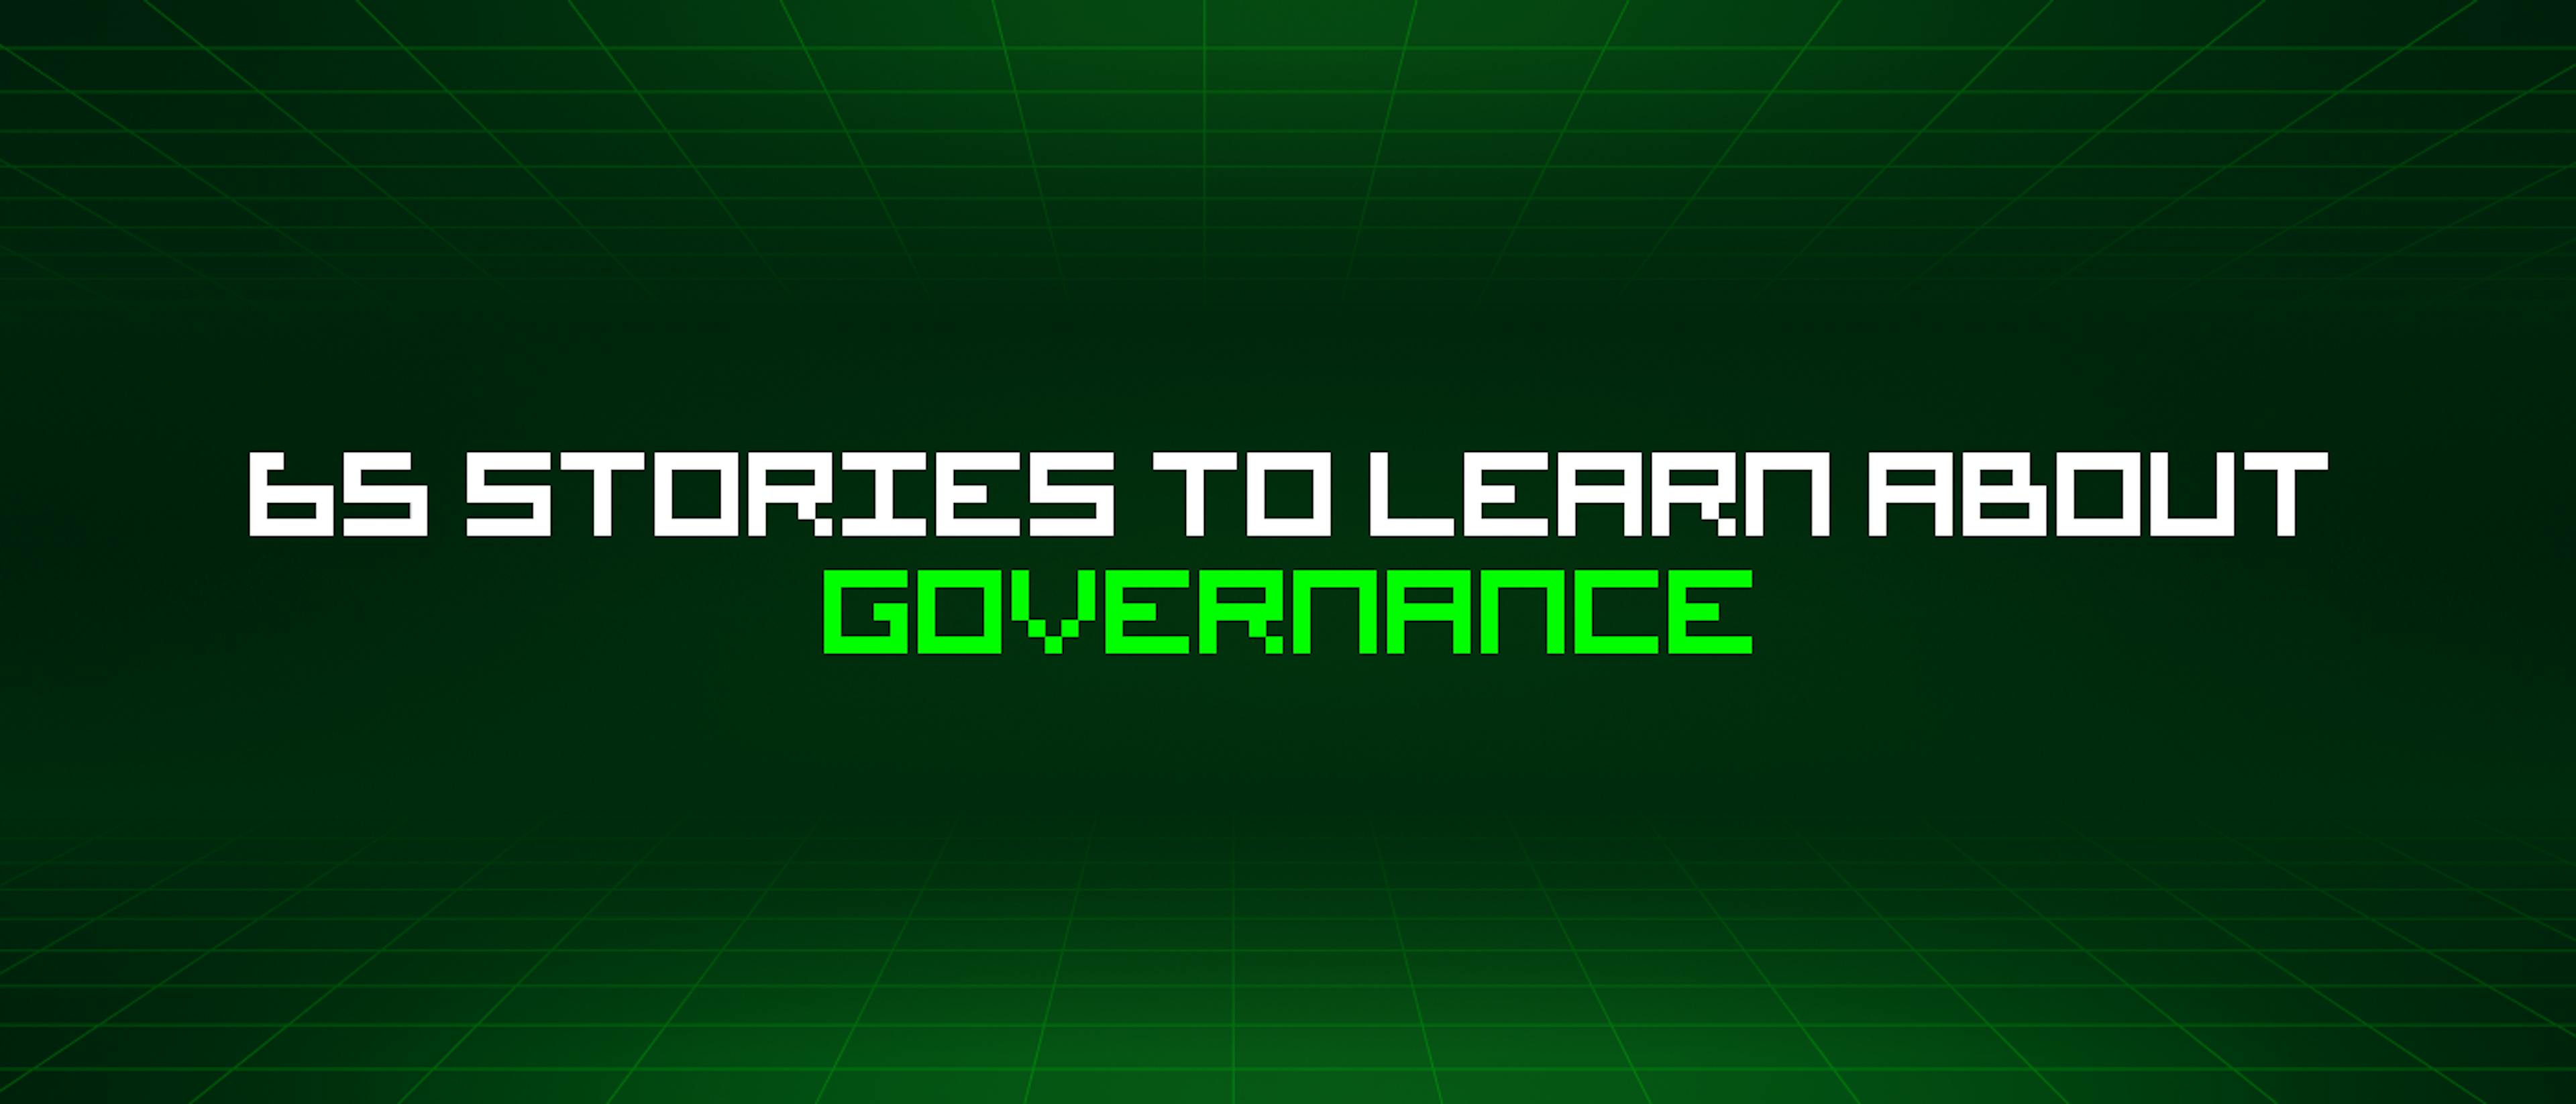 featured image - 65 Stories To Learn About Governance